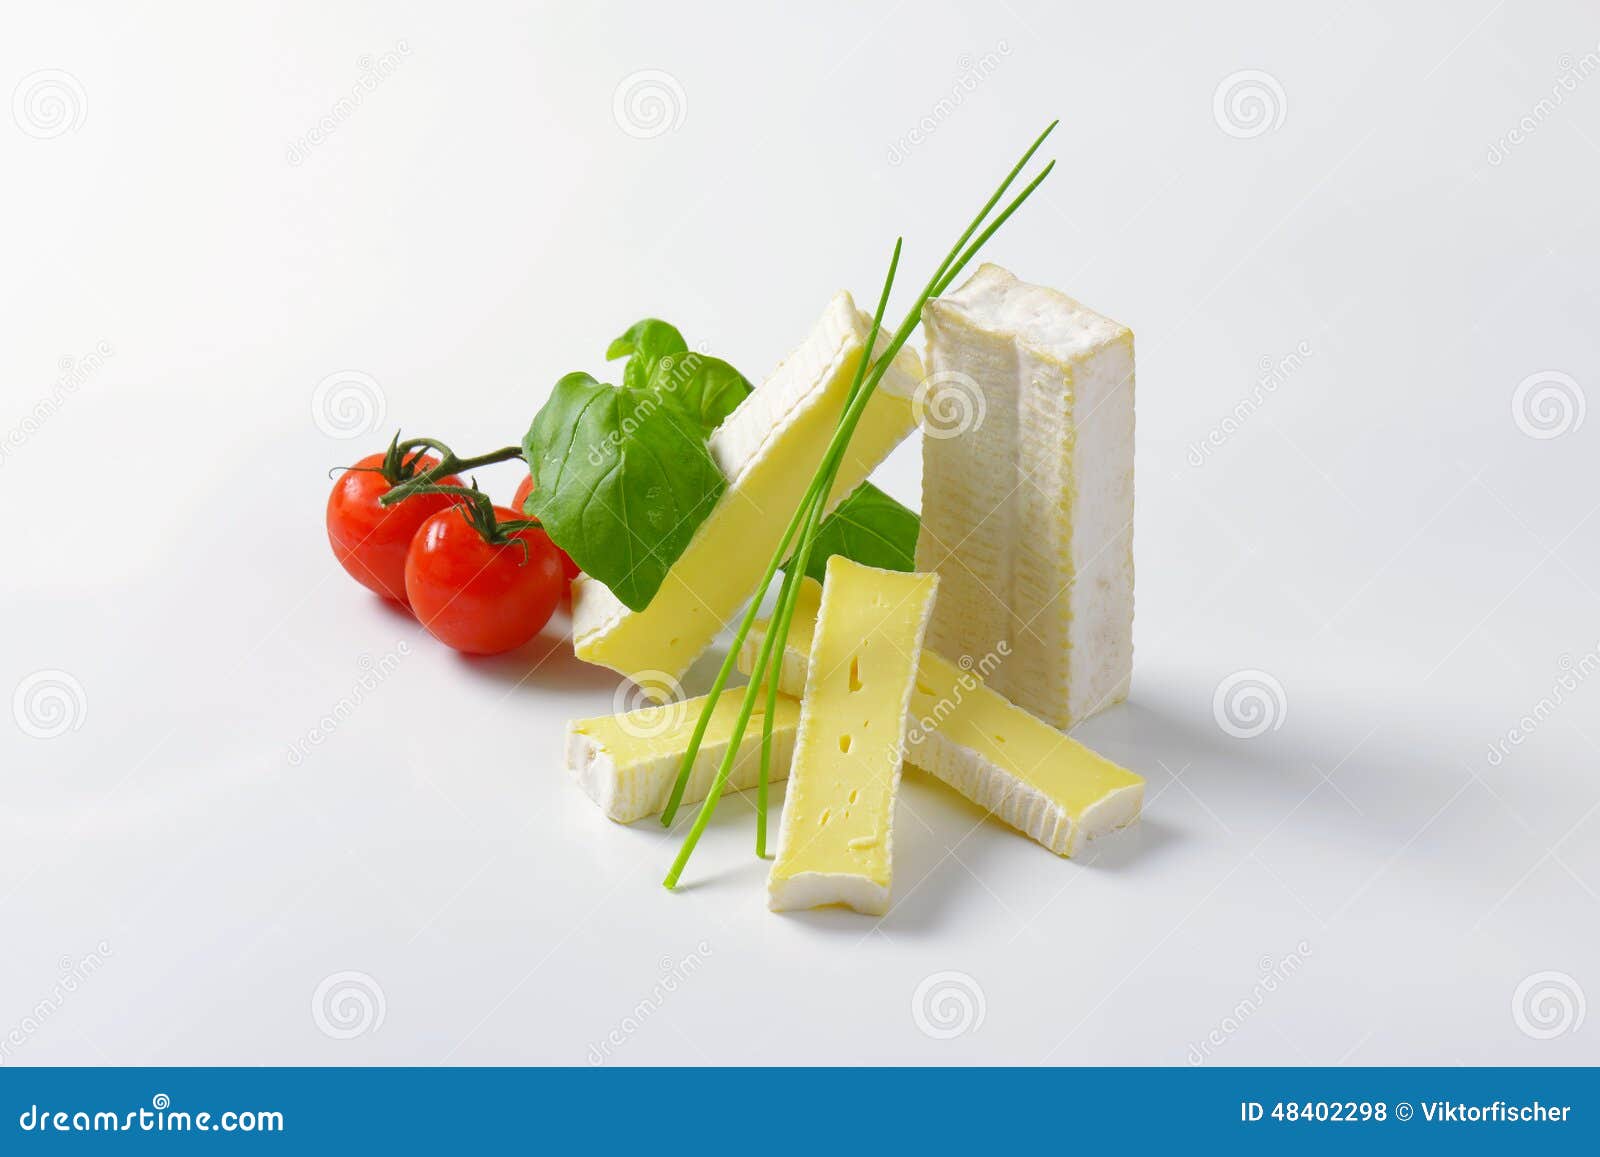 soft cheese with thin white rind